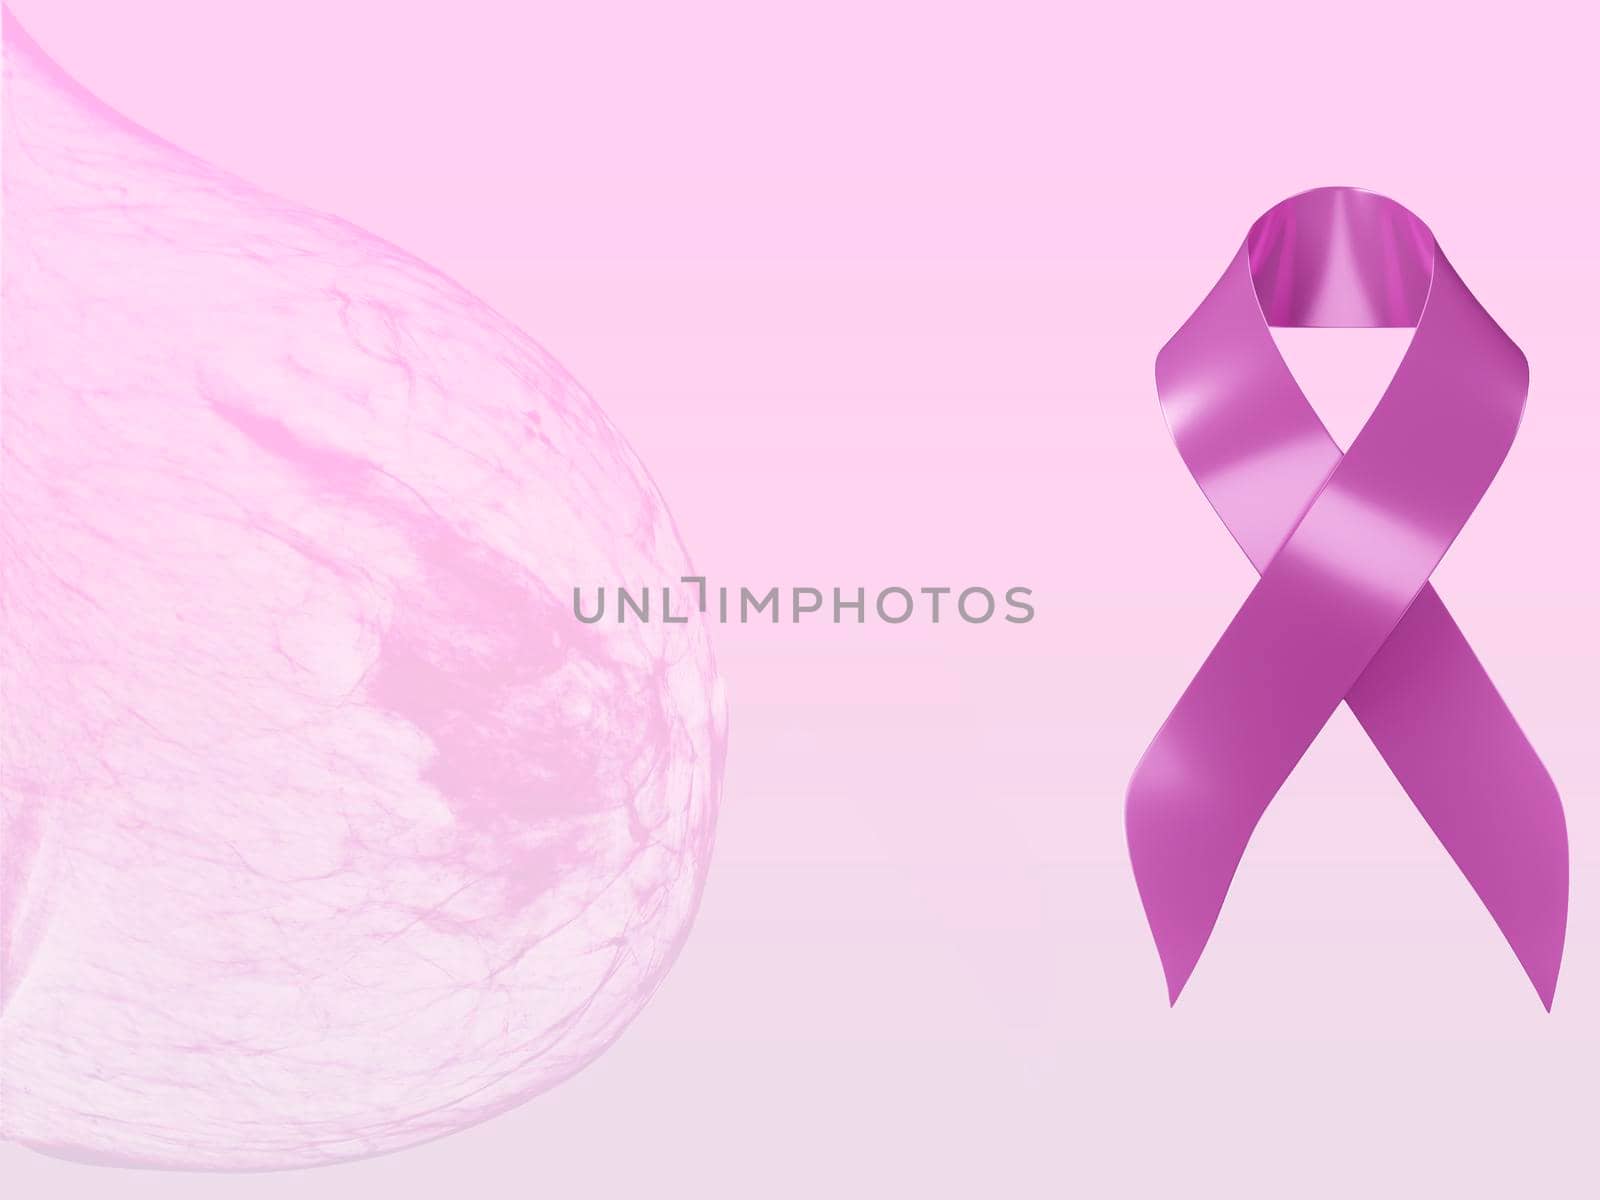 Realistic pink ribbon for breast cancer awareness symbol 3d rendering with mammogram isolated on pink background. Clipping path.